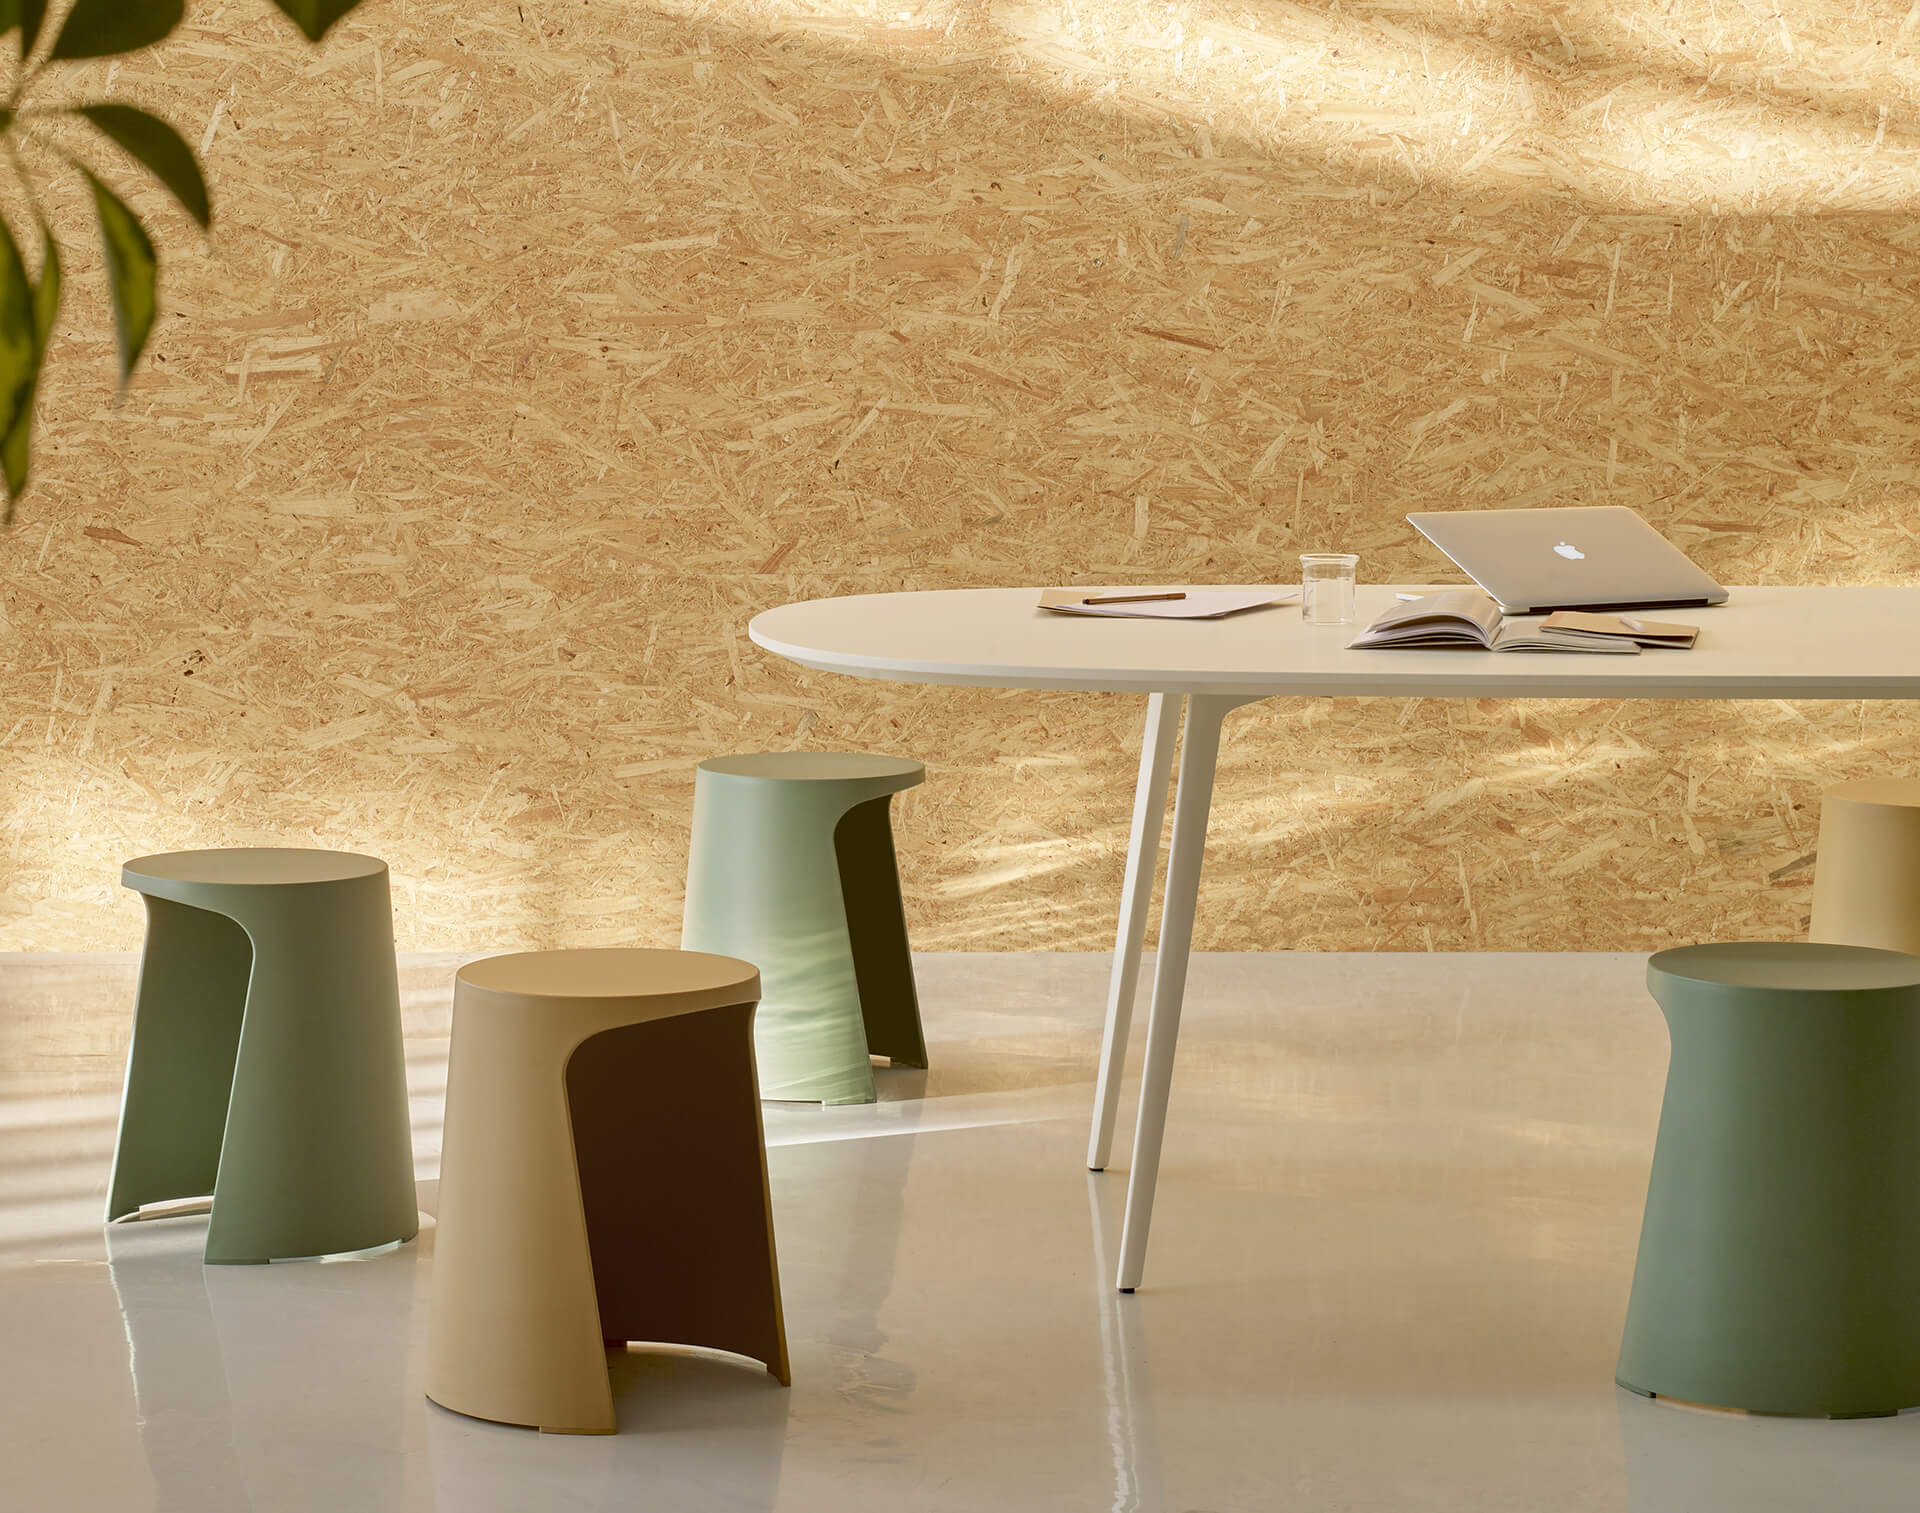 The Handy Stool defined by Stephen Philips for Sellex